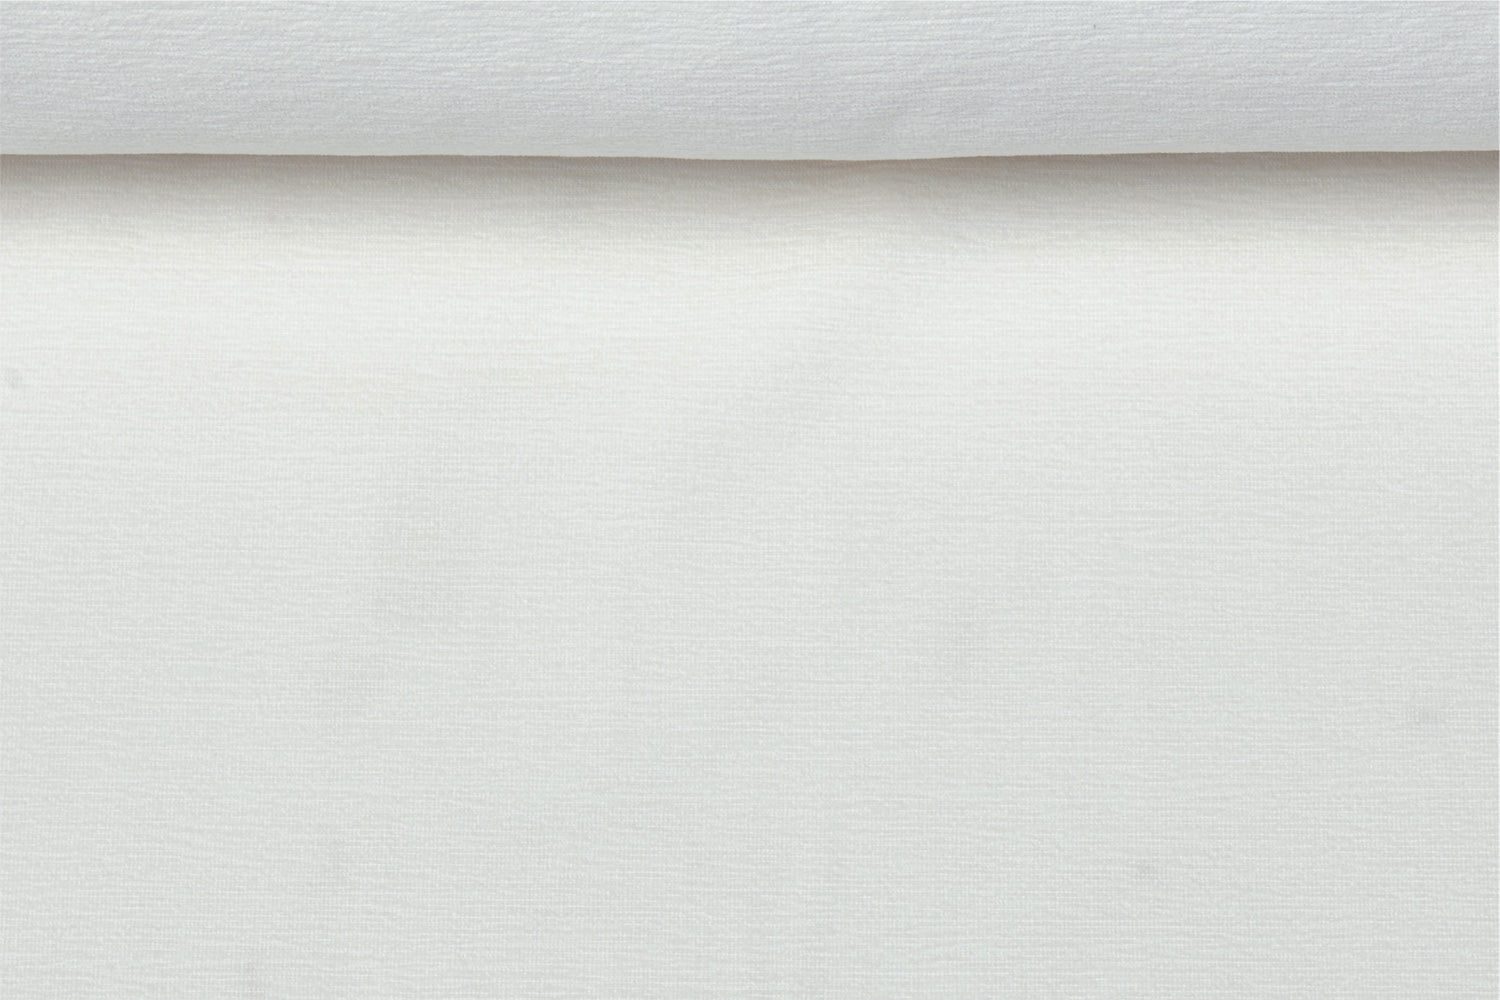 A birds eye view of a white solution dyed acrylic fabric with a terry towel finish.